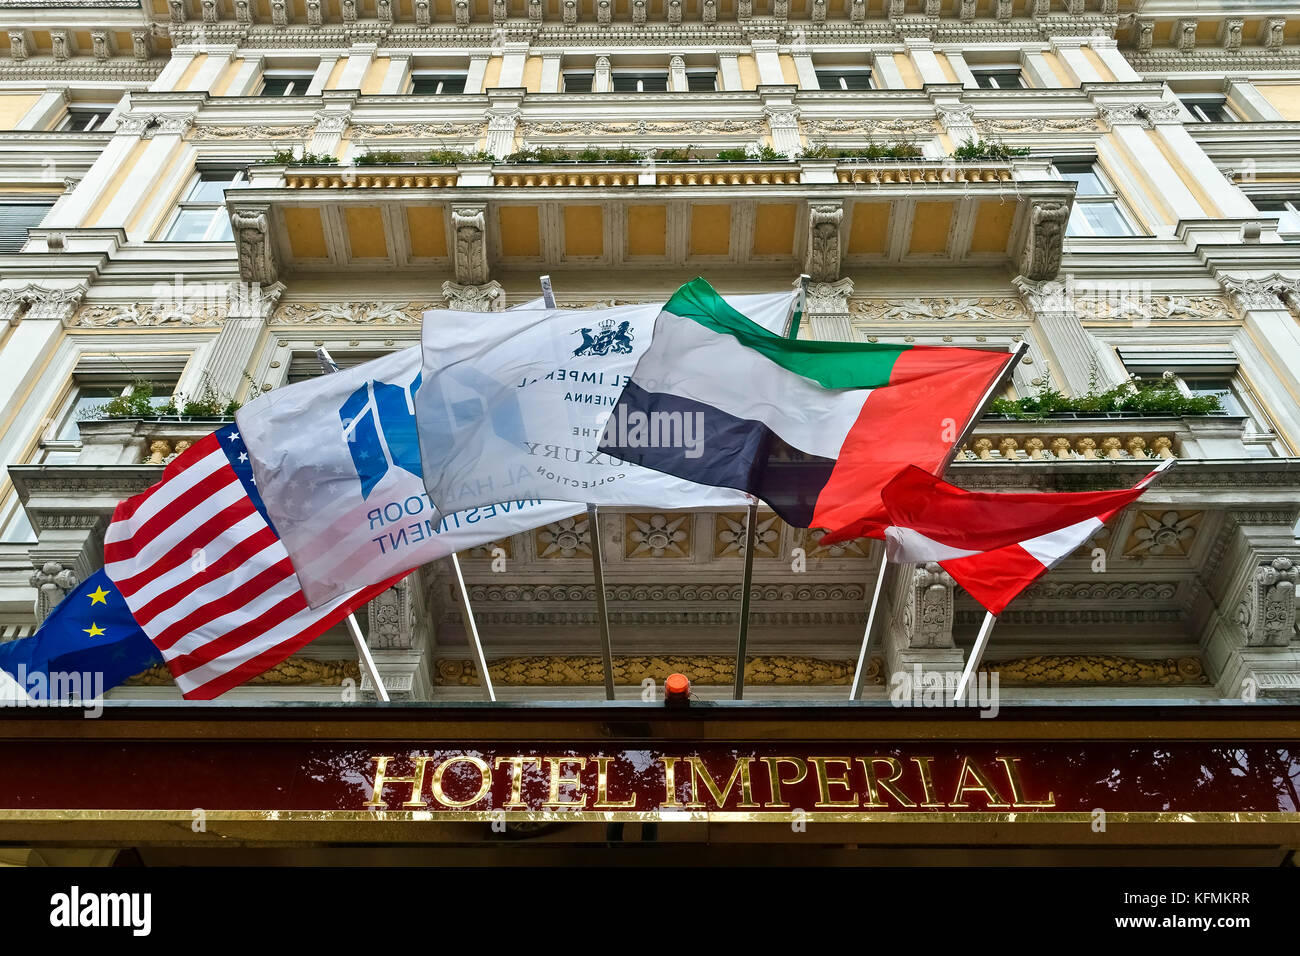 Imperial hotel building facade with flags. 5 star luxury hotel. Sign. Exterior Wurttemberg Palace. Vienna City, Austria, Europe. Lifestyle concept. Stock Photo